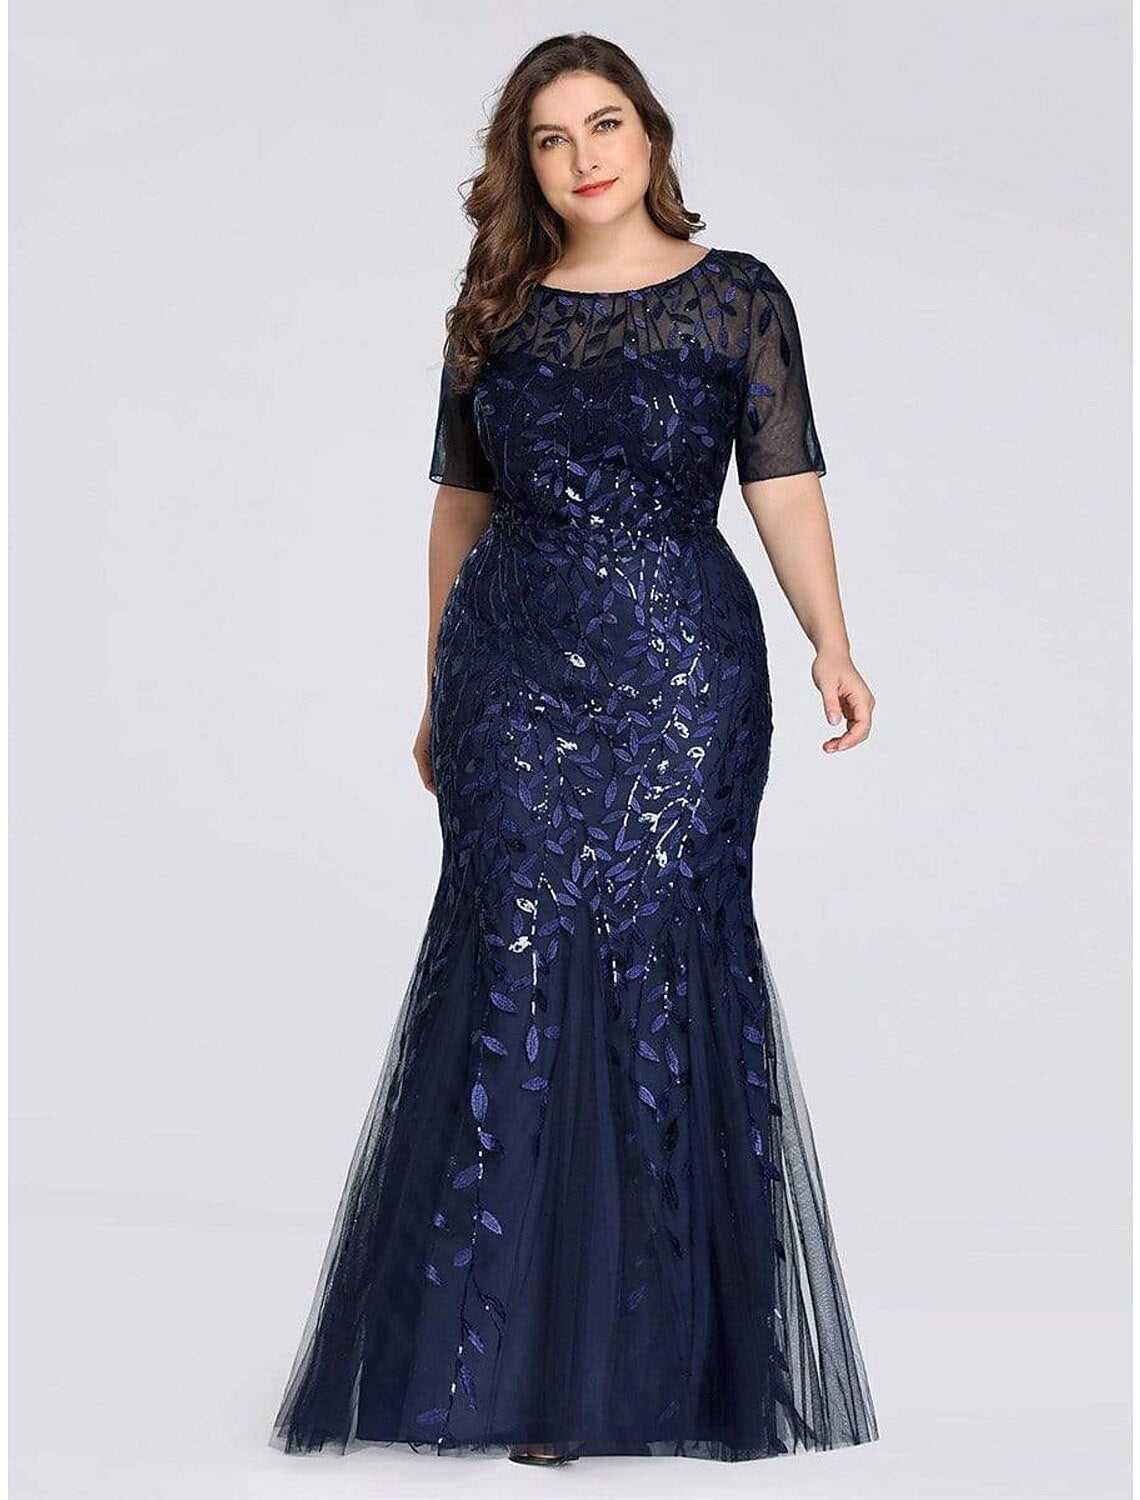 Mermaid / Trumpet Empire Elegant Party Wear Formal Evening Dress Jewel Neck Short Sleeve Floor Length Tulle with Embroidery